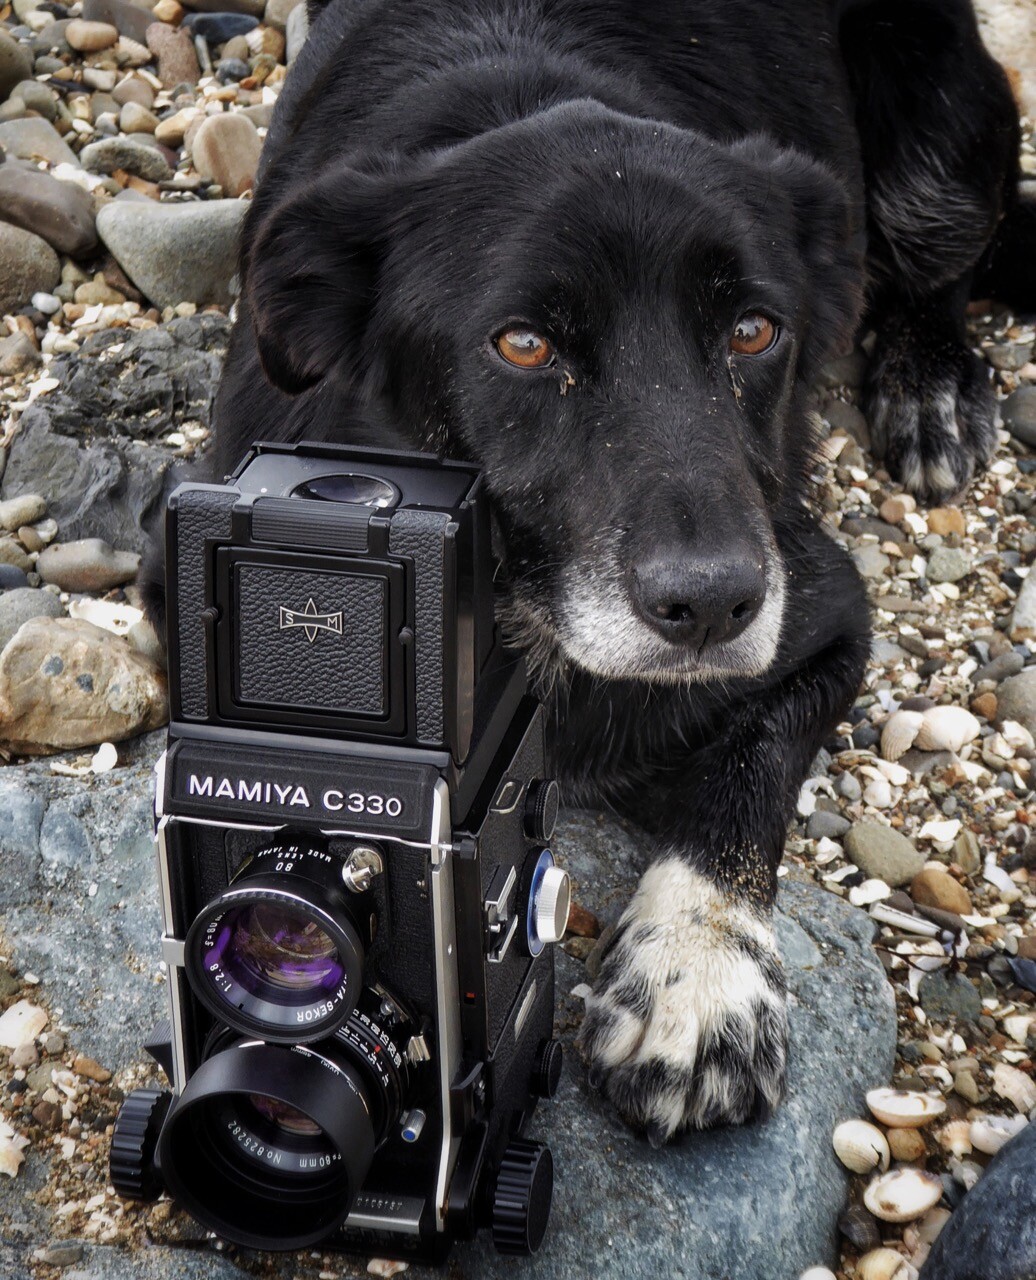 Colour photo of  a black sheepdog, going grey around the muzzle, with white paws. He is crouched behind a classic Mamiya twin lens film camera, looking after it  while I take photos with a small digital camera. We are on a pebble beach.